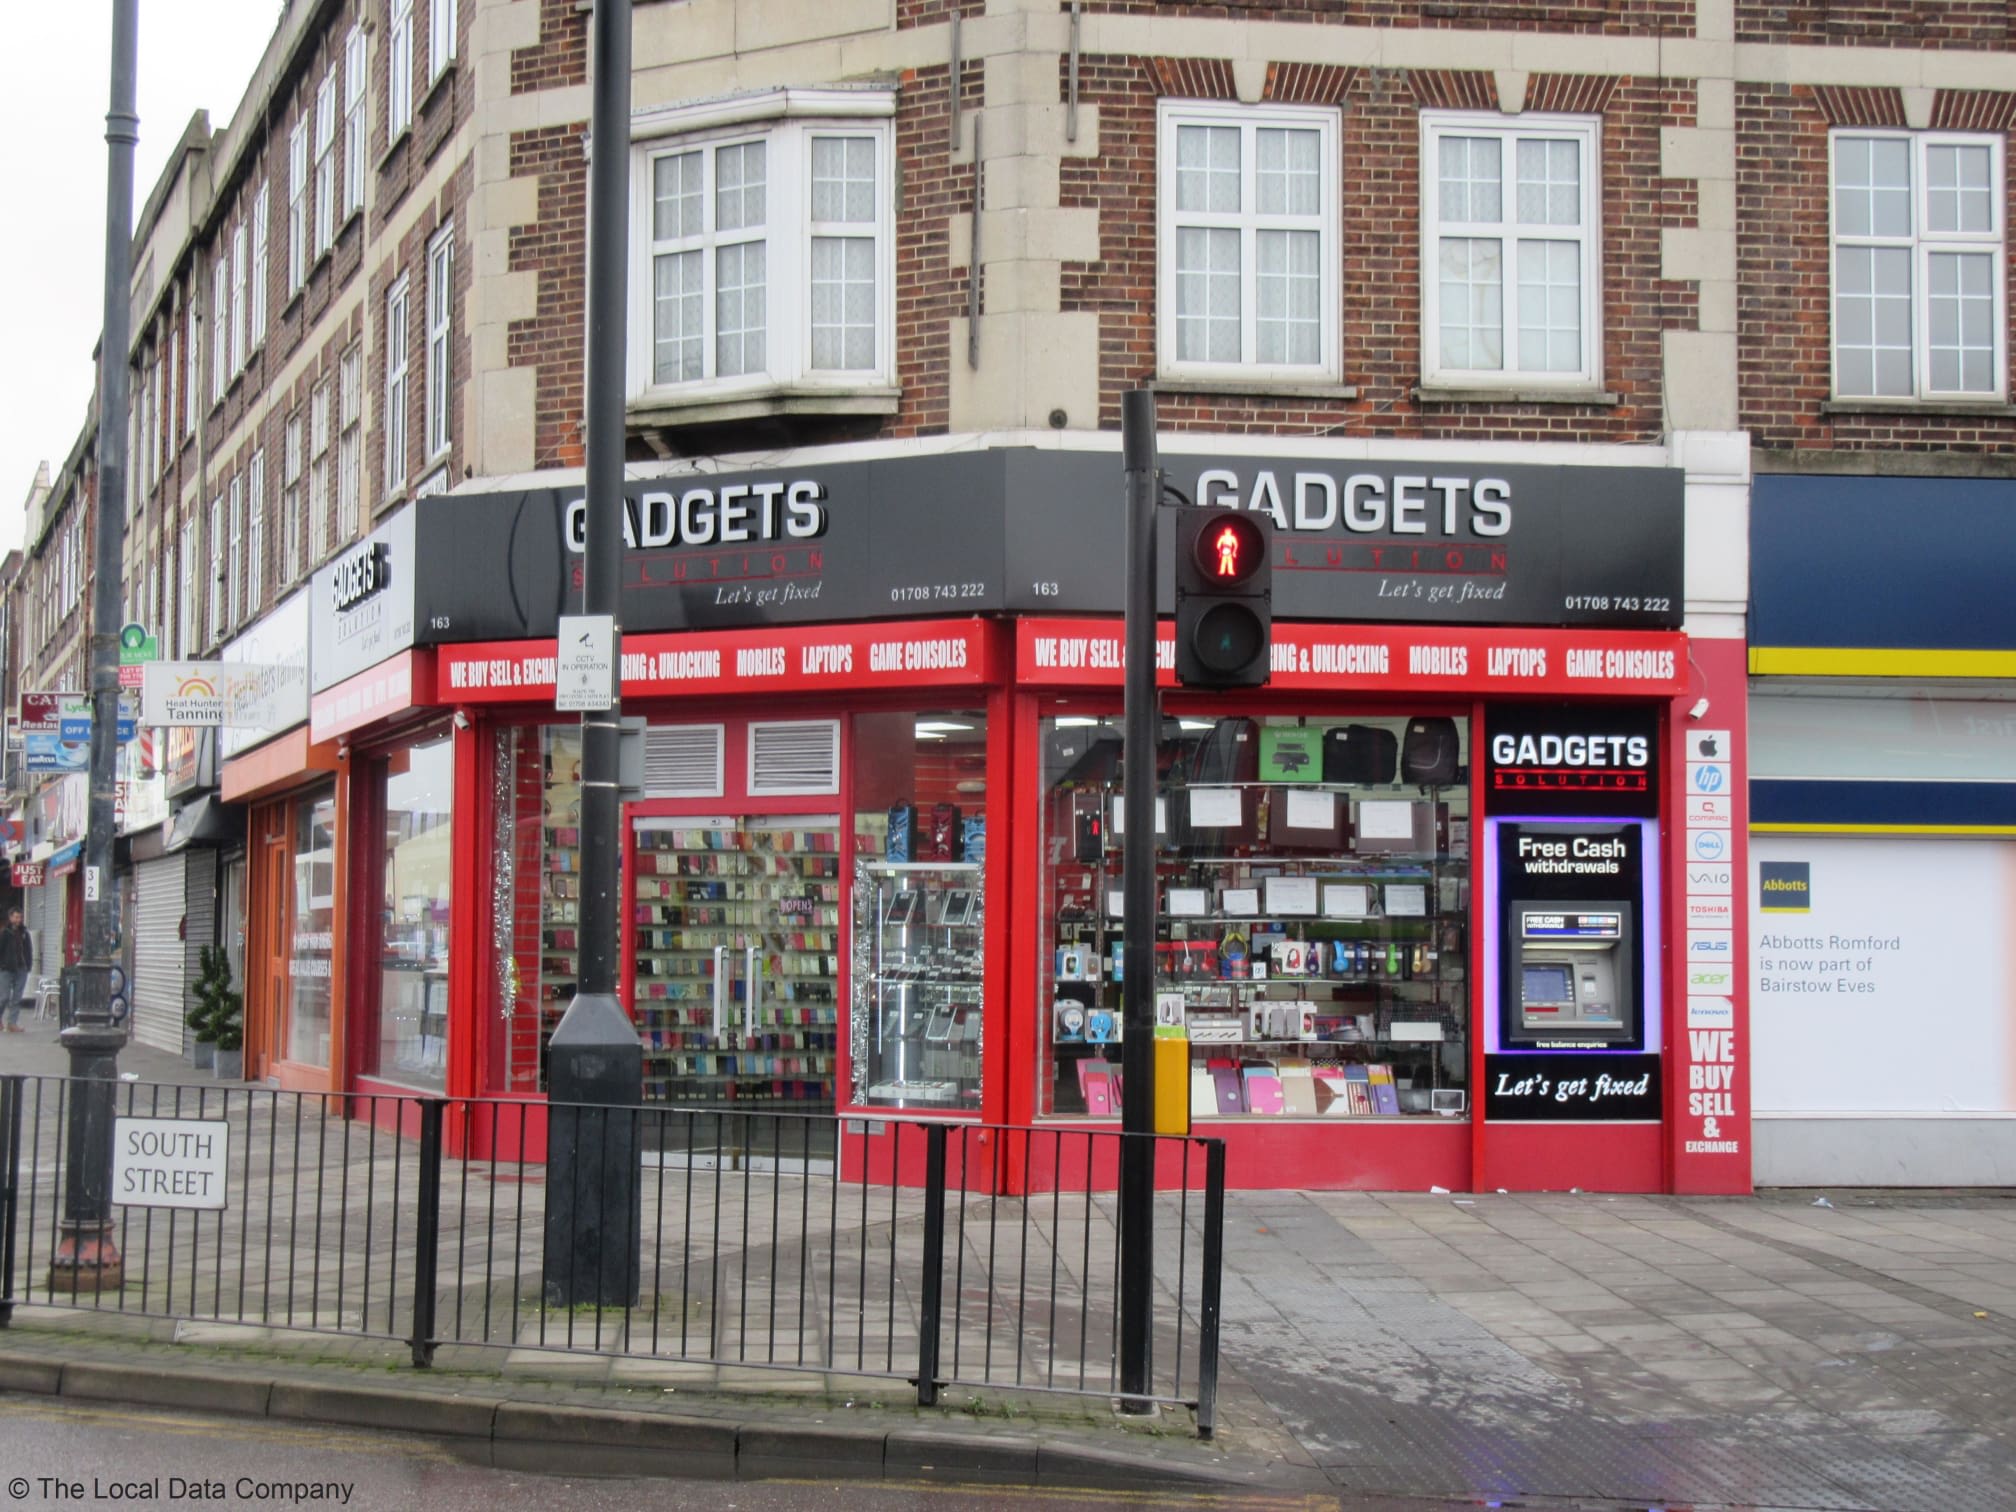 Images Gadgets Solution Romford